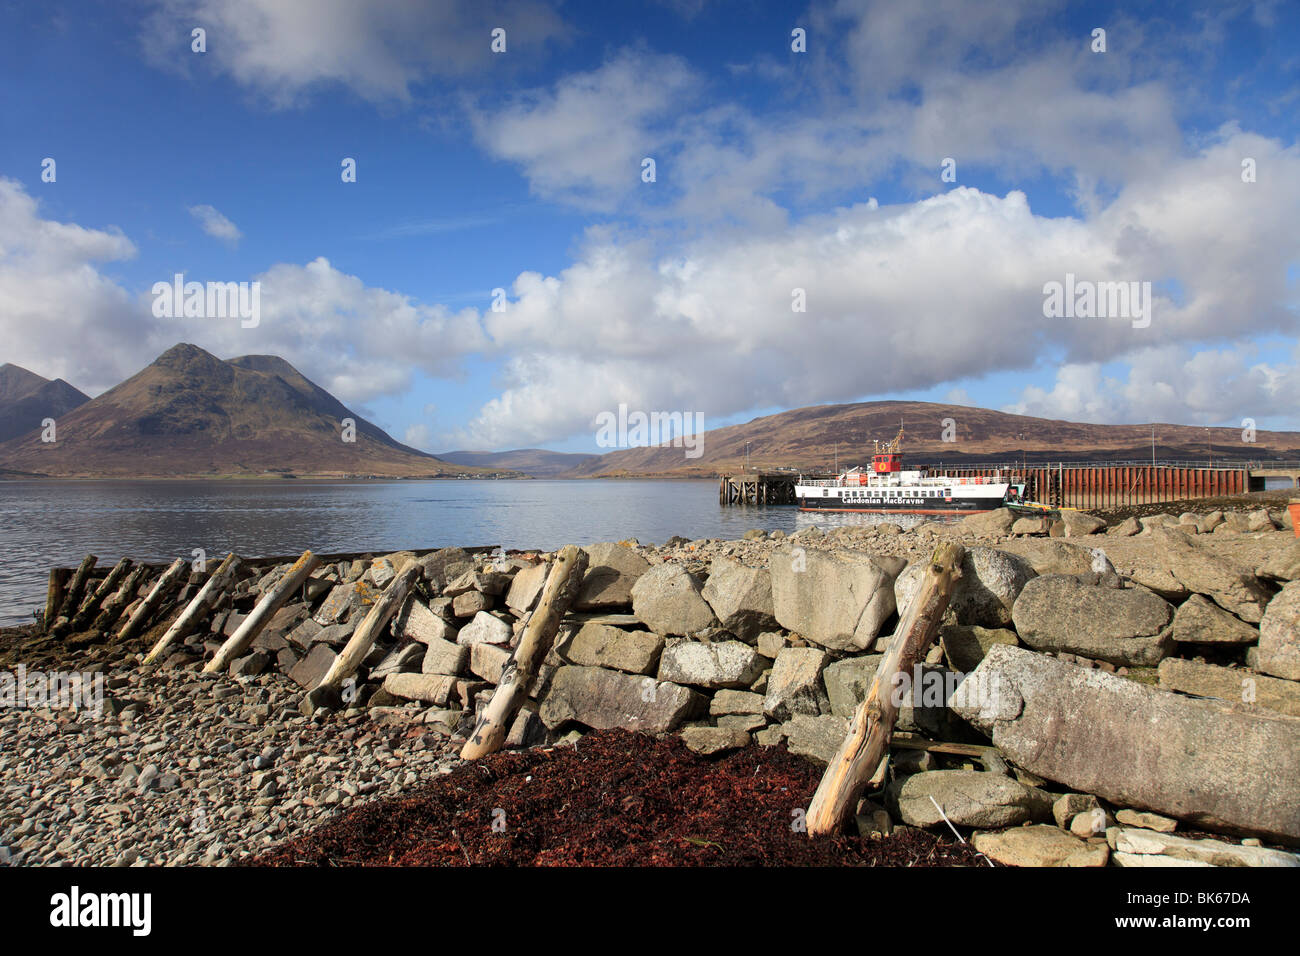 View from Inverarish on the Isle of Raasay to the Cuillin mountains on the Isle of Skye with Raasay ferry waiting to sail Stock Photo